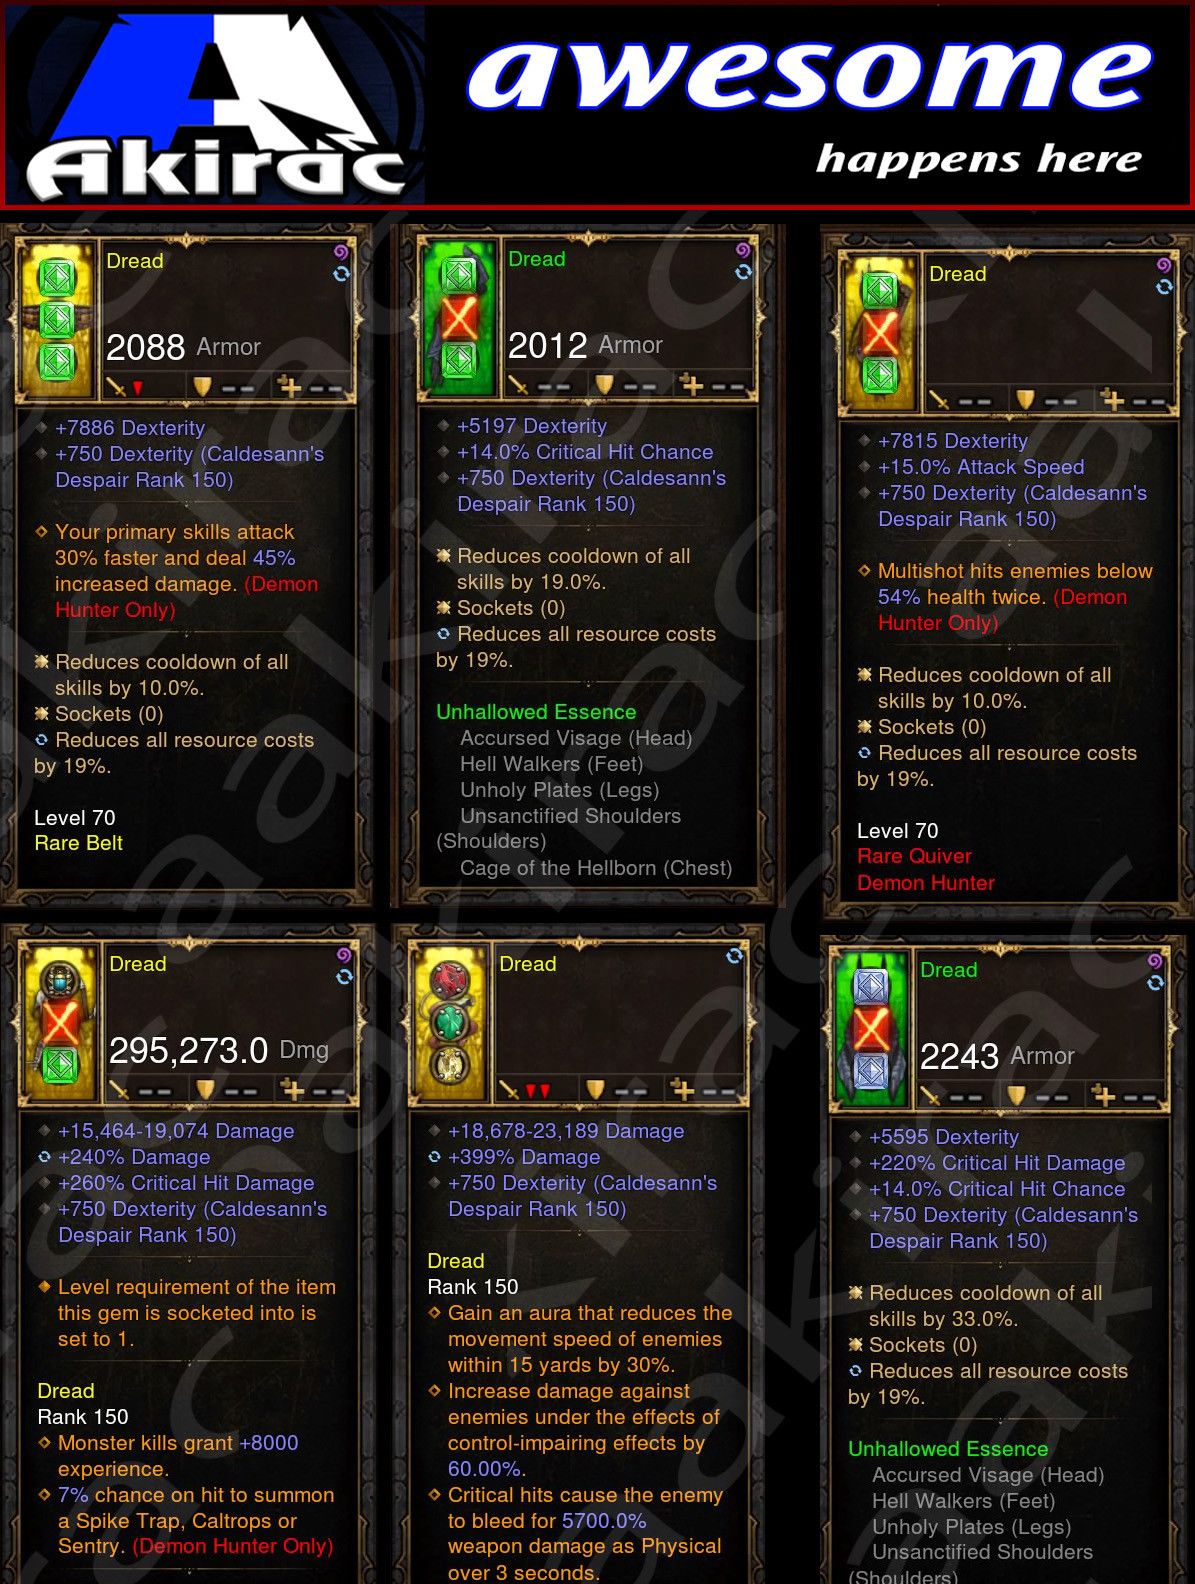 Diablo 3 Immortal v2 Unhallow Demon Hunter Modded Set for Rift 150 Dread Diablo 3 Mods ROS Seasonal and Non Seasonal Save Mod - Modded Items and Gear - Hacks - Cheats - Trainers for Playstation 4 - Playstation 5 - Nintendo Switch - Xbox One